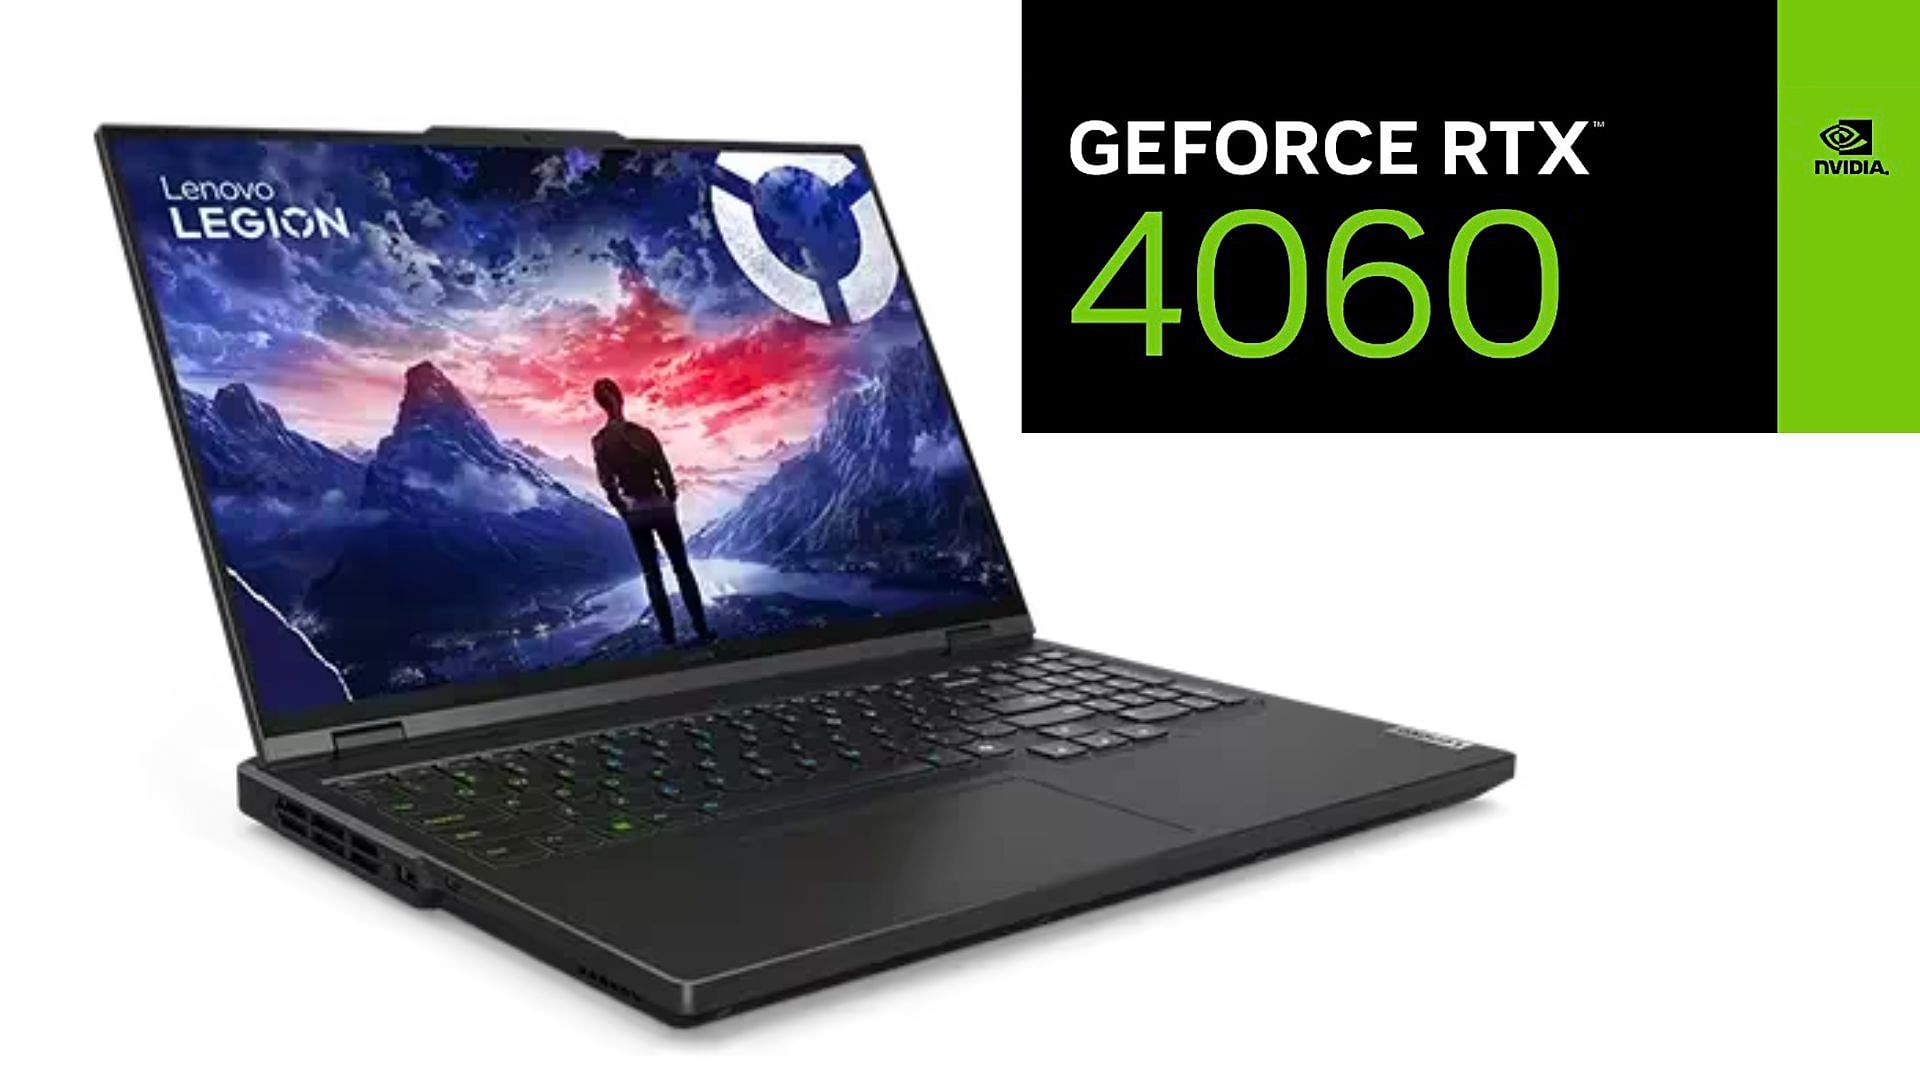 An RTX 4060 laptop is selling for $516 off today (Image via Lenovo)